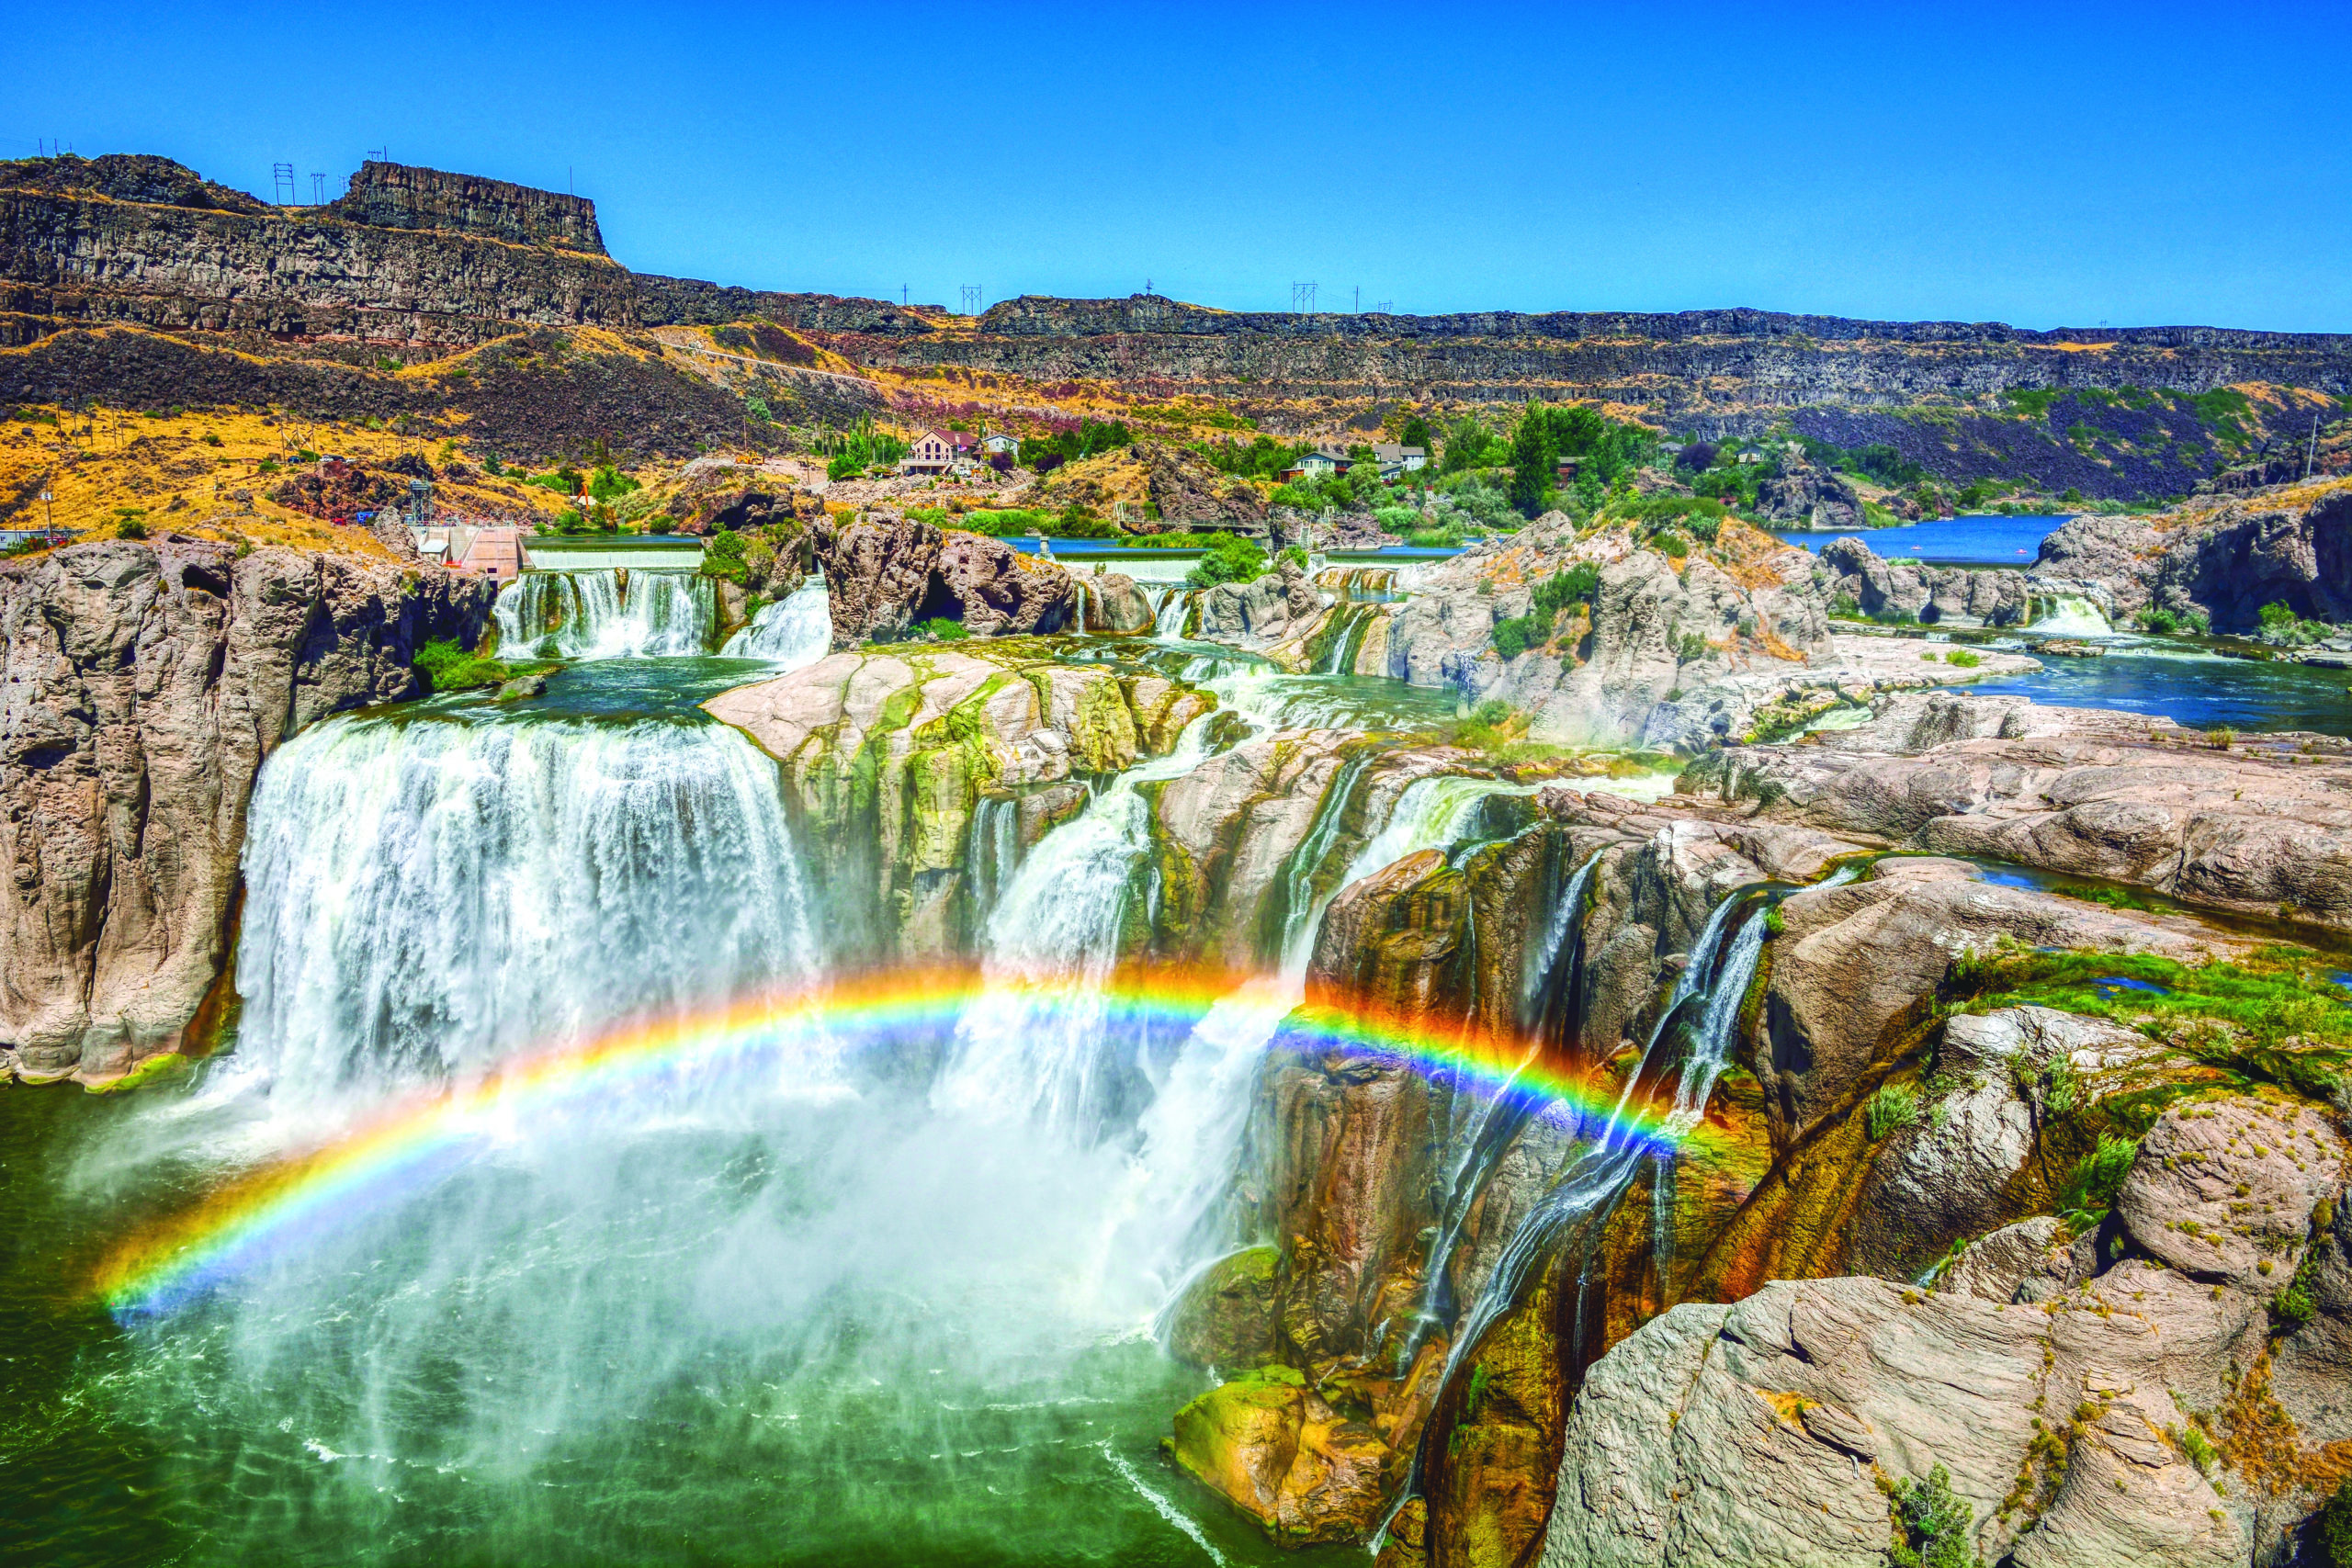 Shoshone Falls is located on the Snake River in southern Idaho. The main fall is 700' high and is considered by many to be 'Niagara of the West'. Rendered here in an HDR tone curve to emphasis the beautiful rainbow.